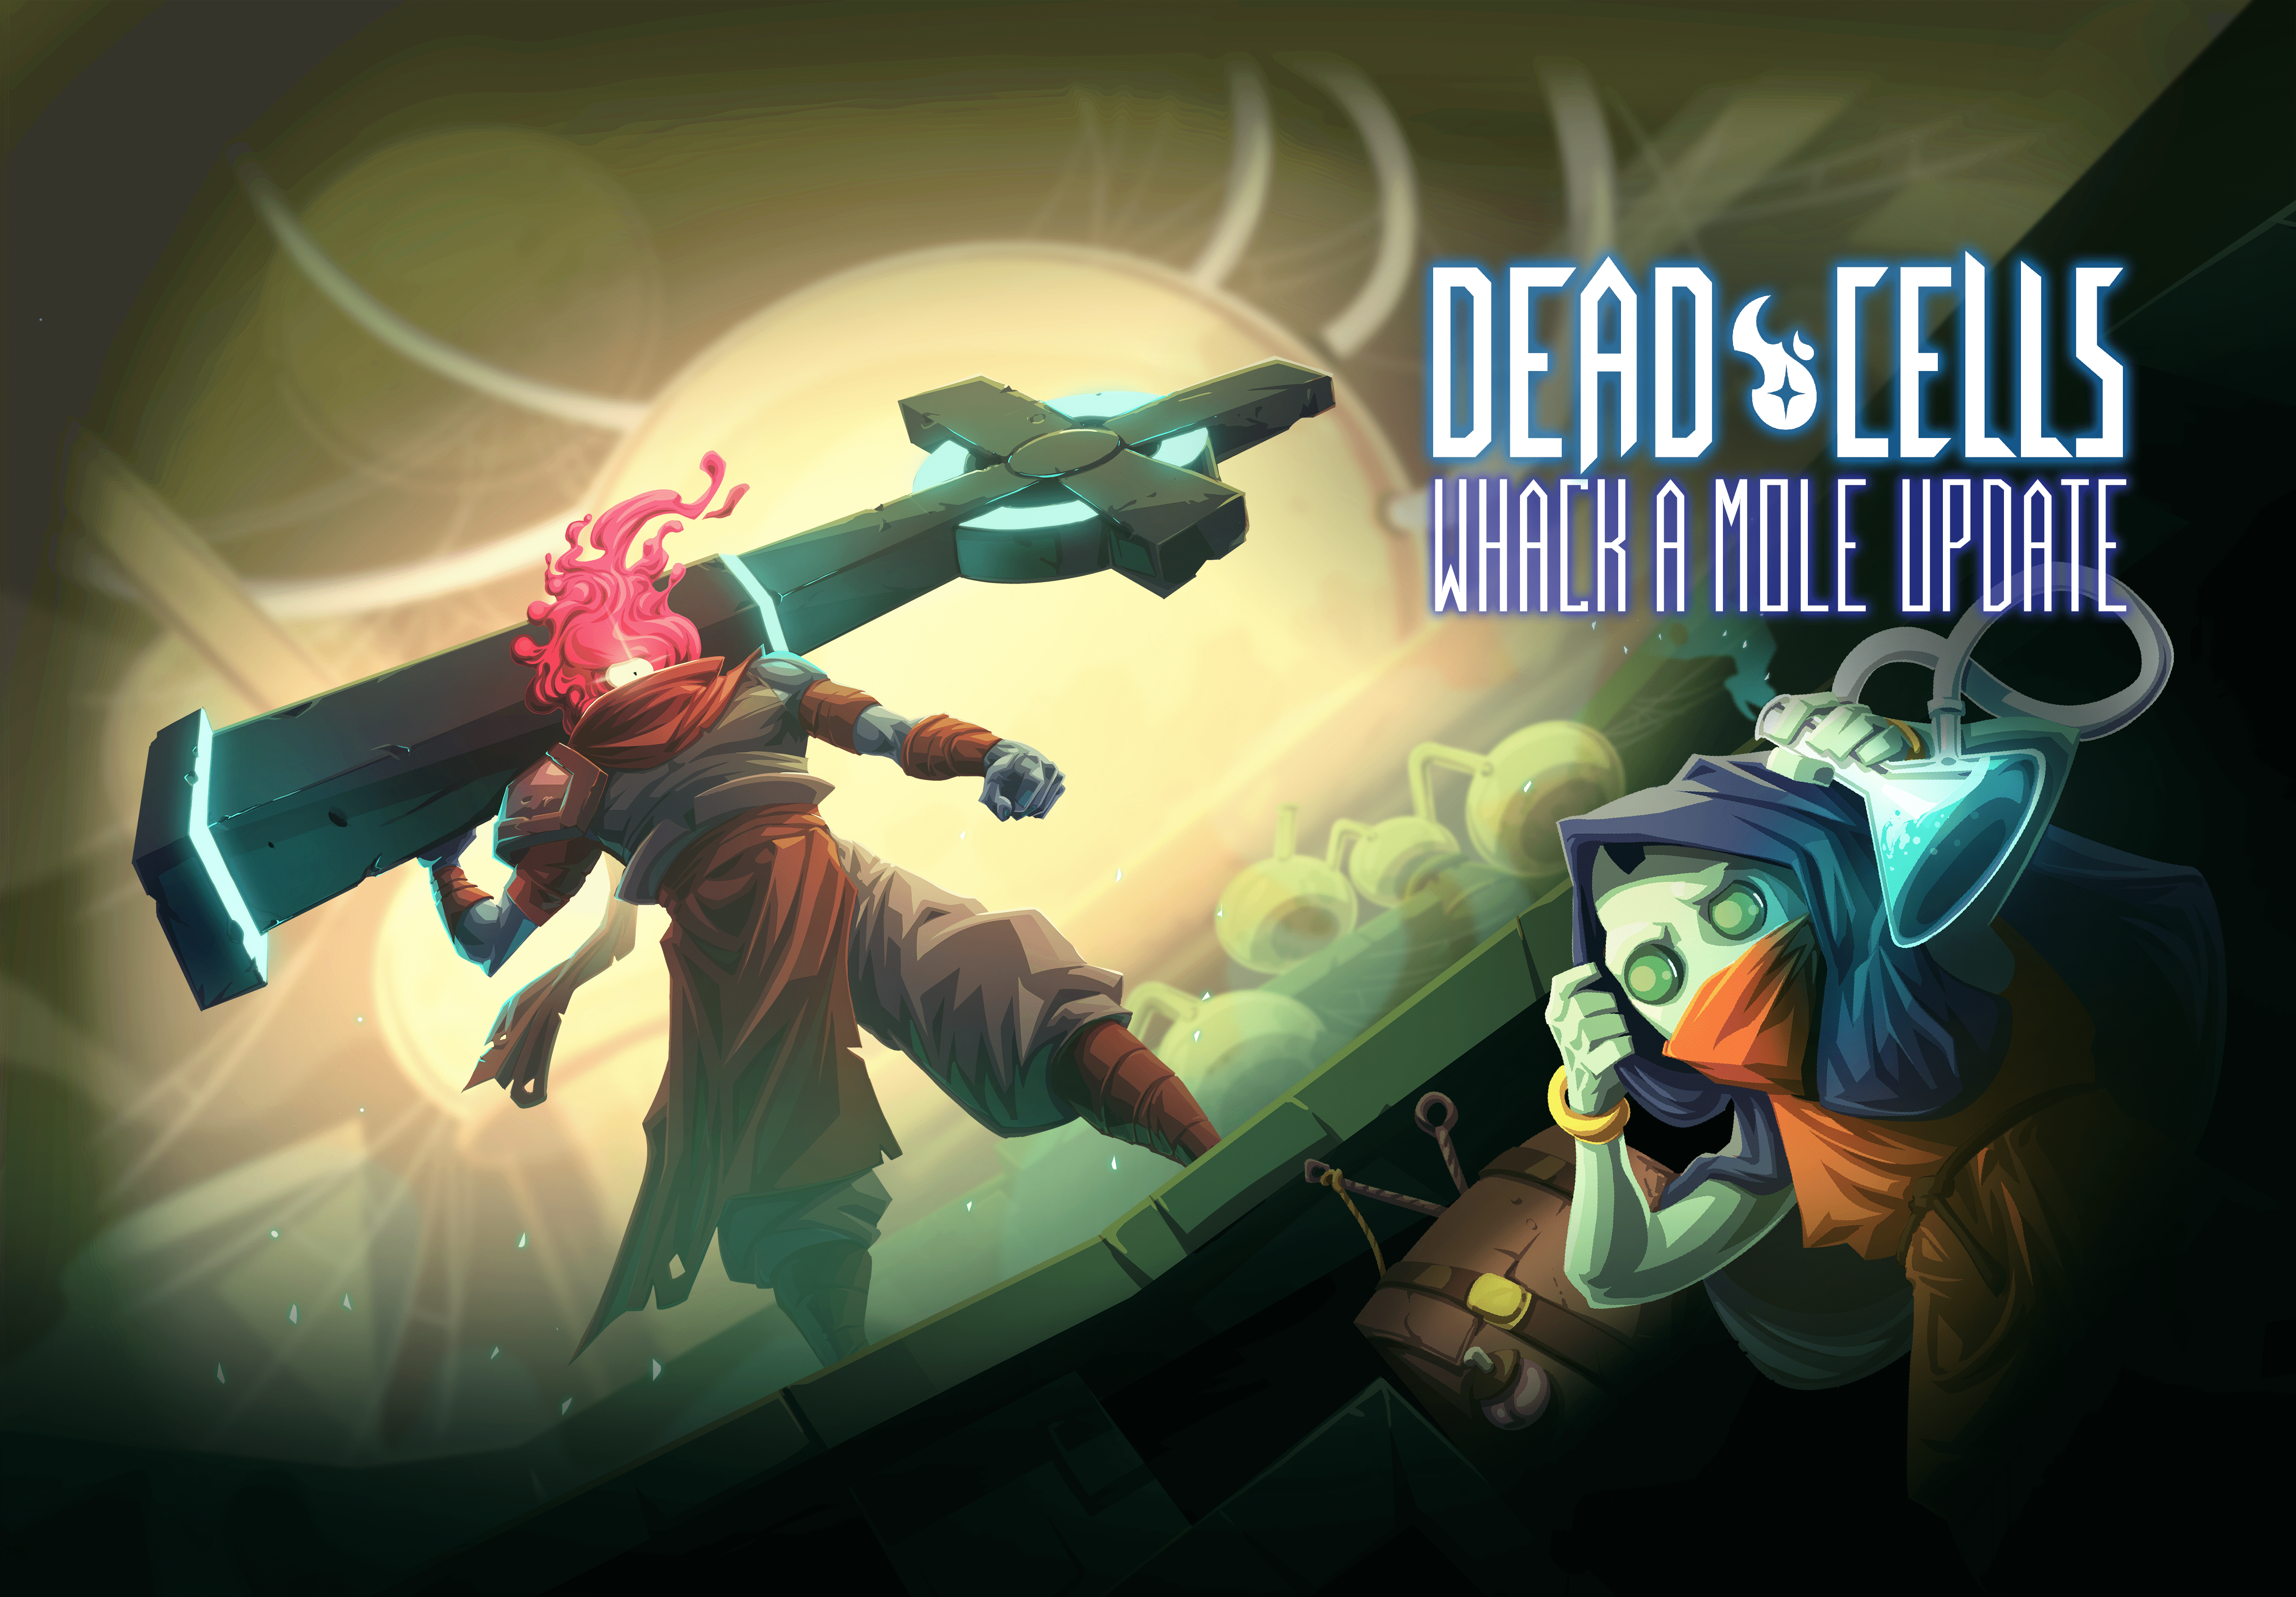 Dead Cells review: An unlikely mix of genres form a new classic